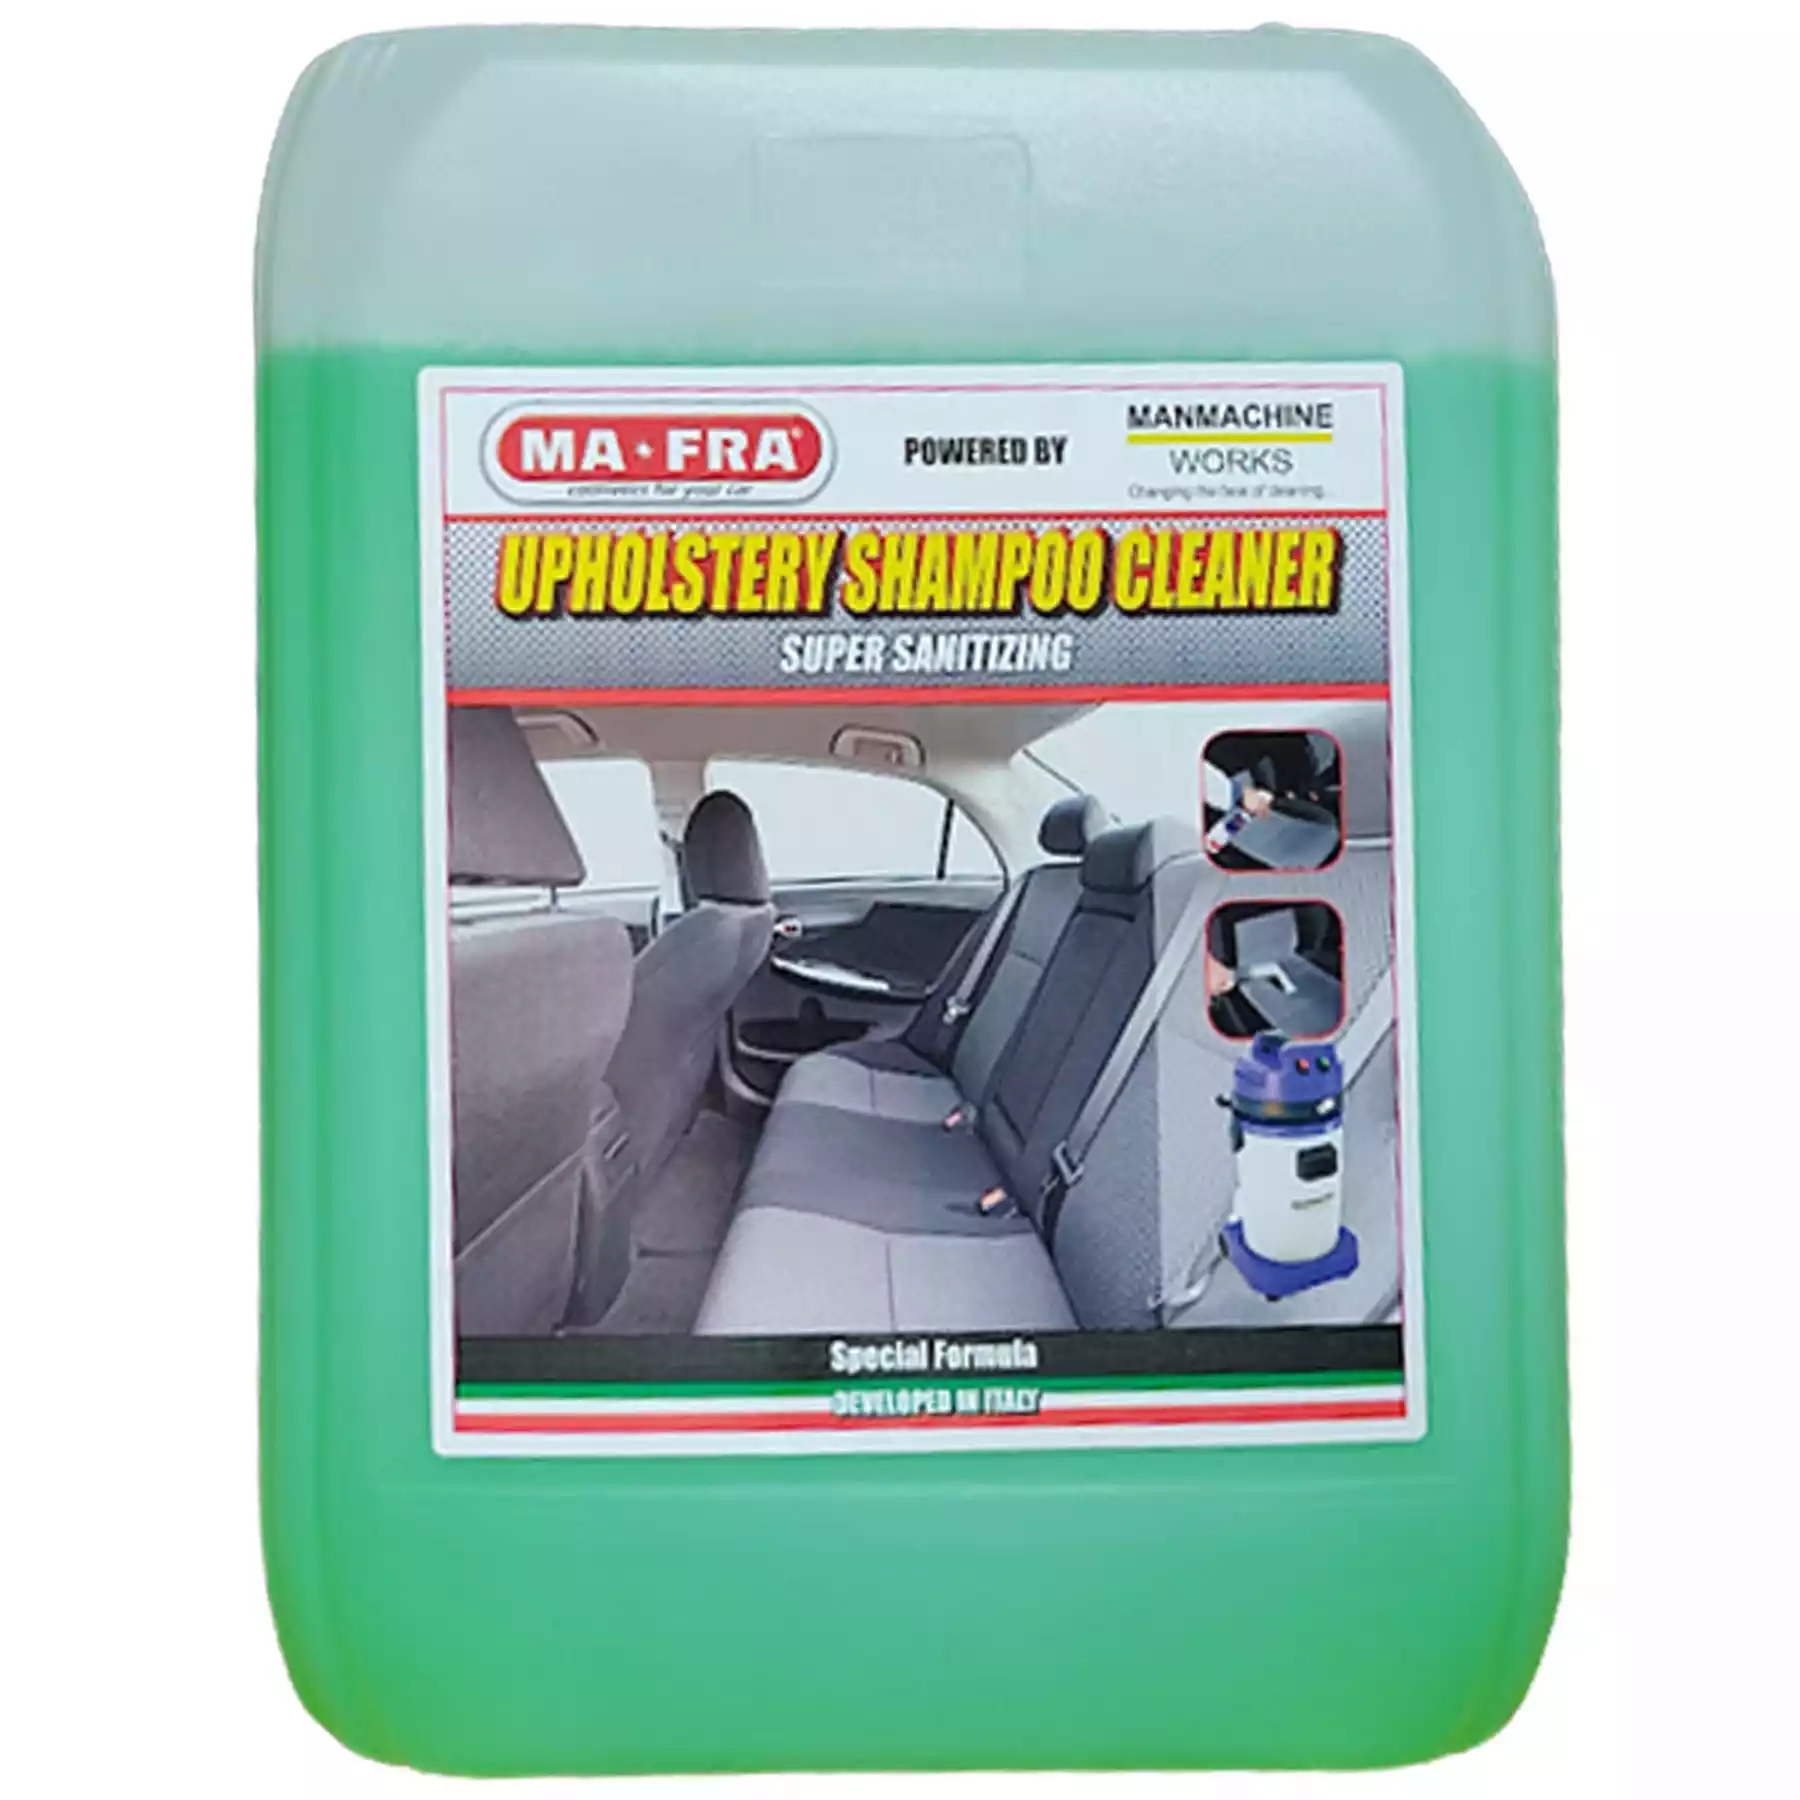 Upholstery Shampoo Cleaner